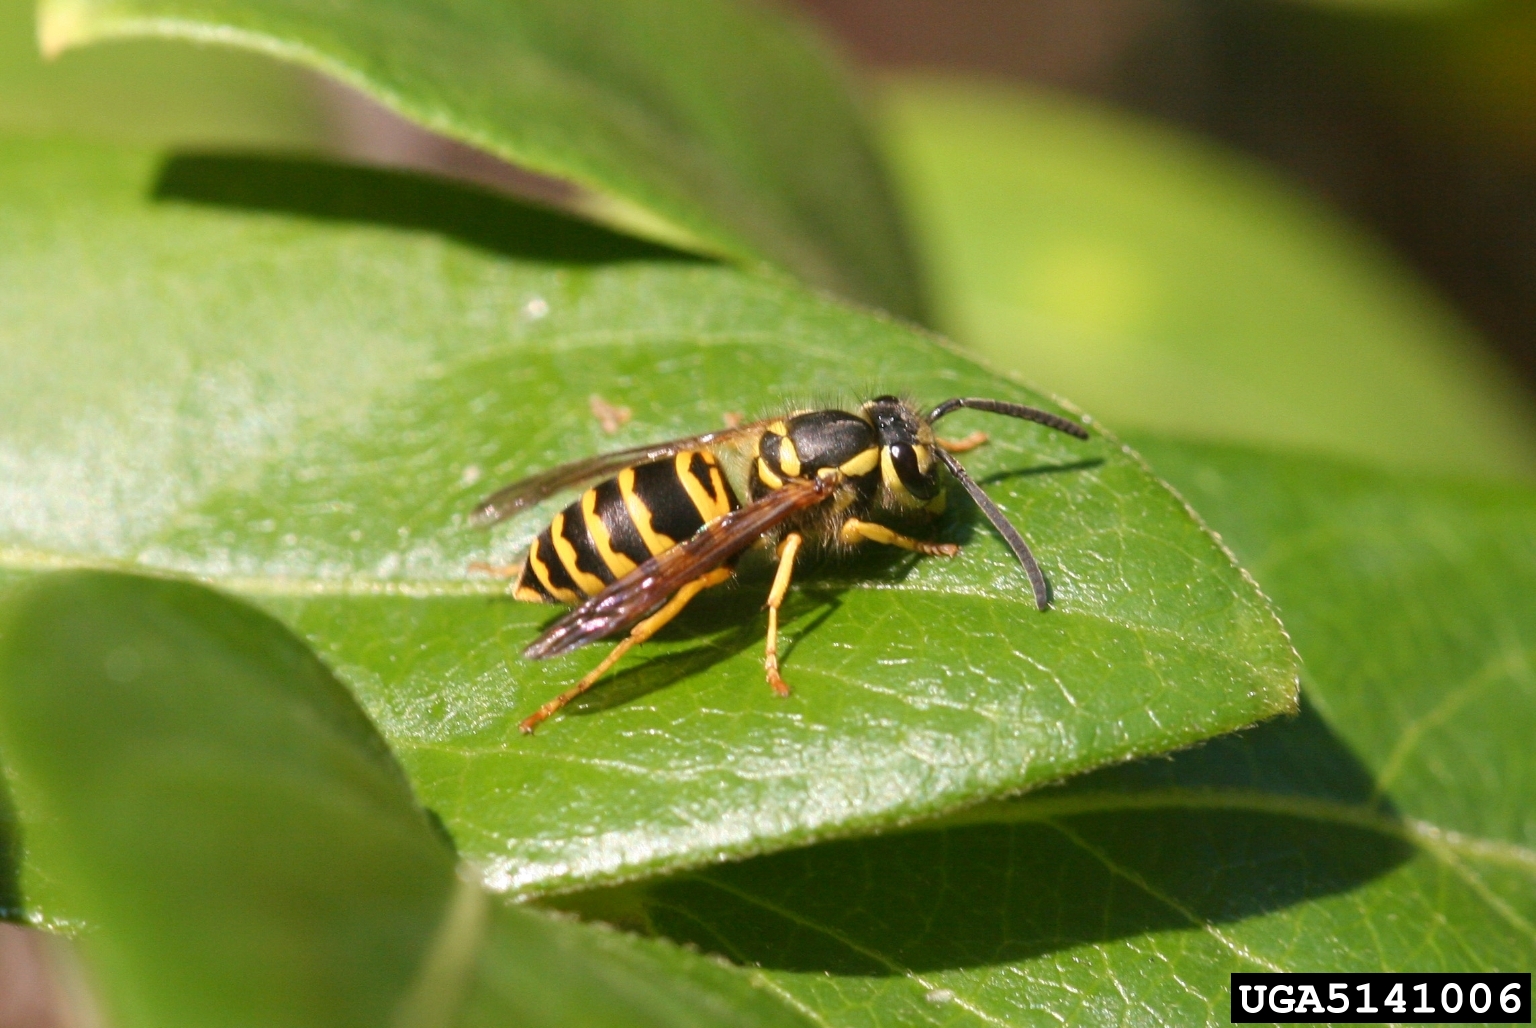 An eastern yellow jacket on a leaf.